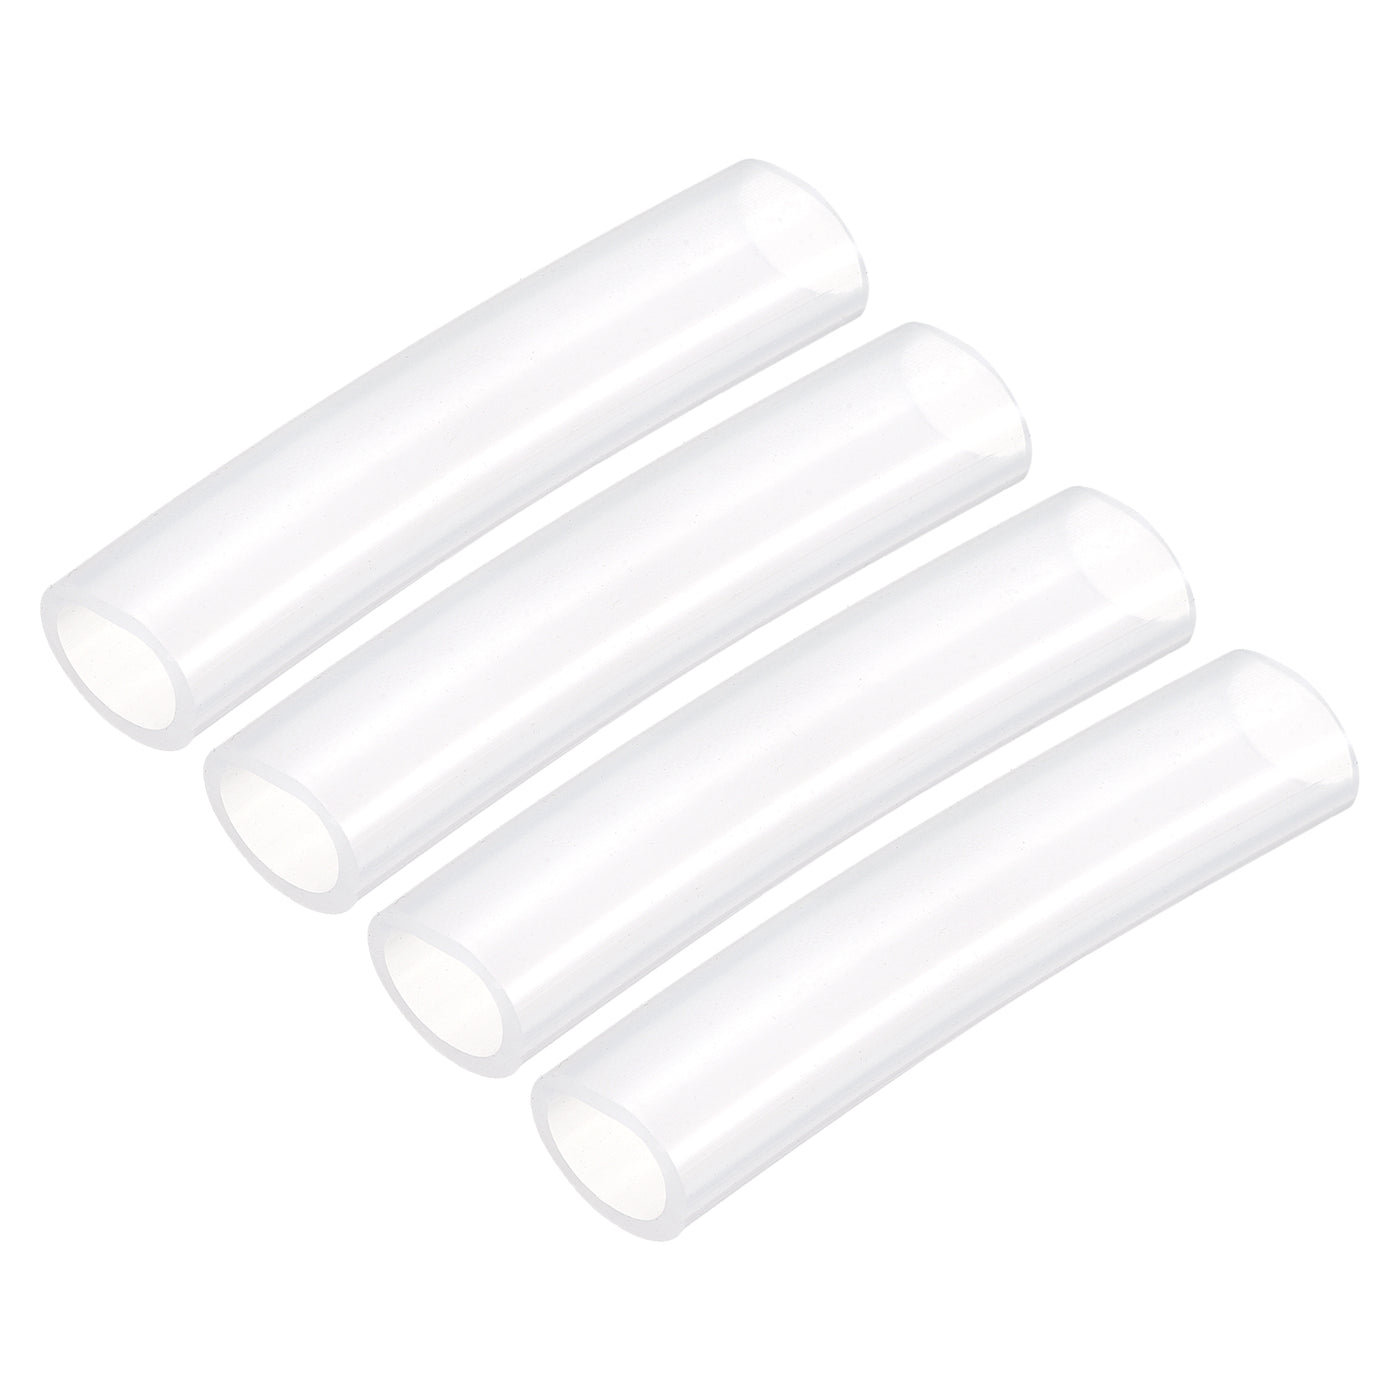 uxcell Uxcell Silicone Tubing 19mm ID,25mm OD 4Pcs 0.33 Ft for Pump Transfer, Transparent